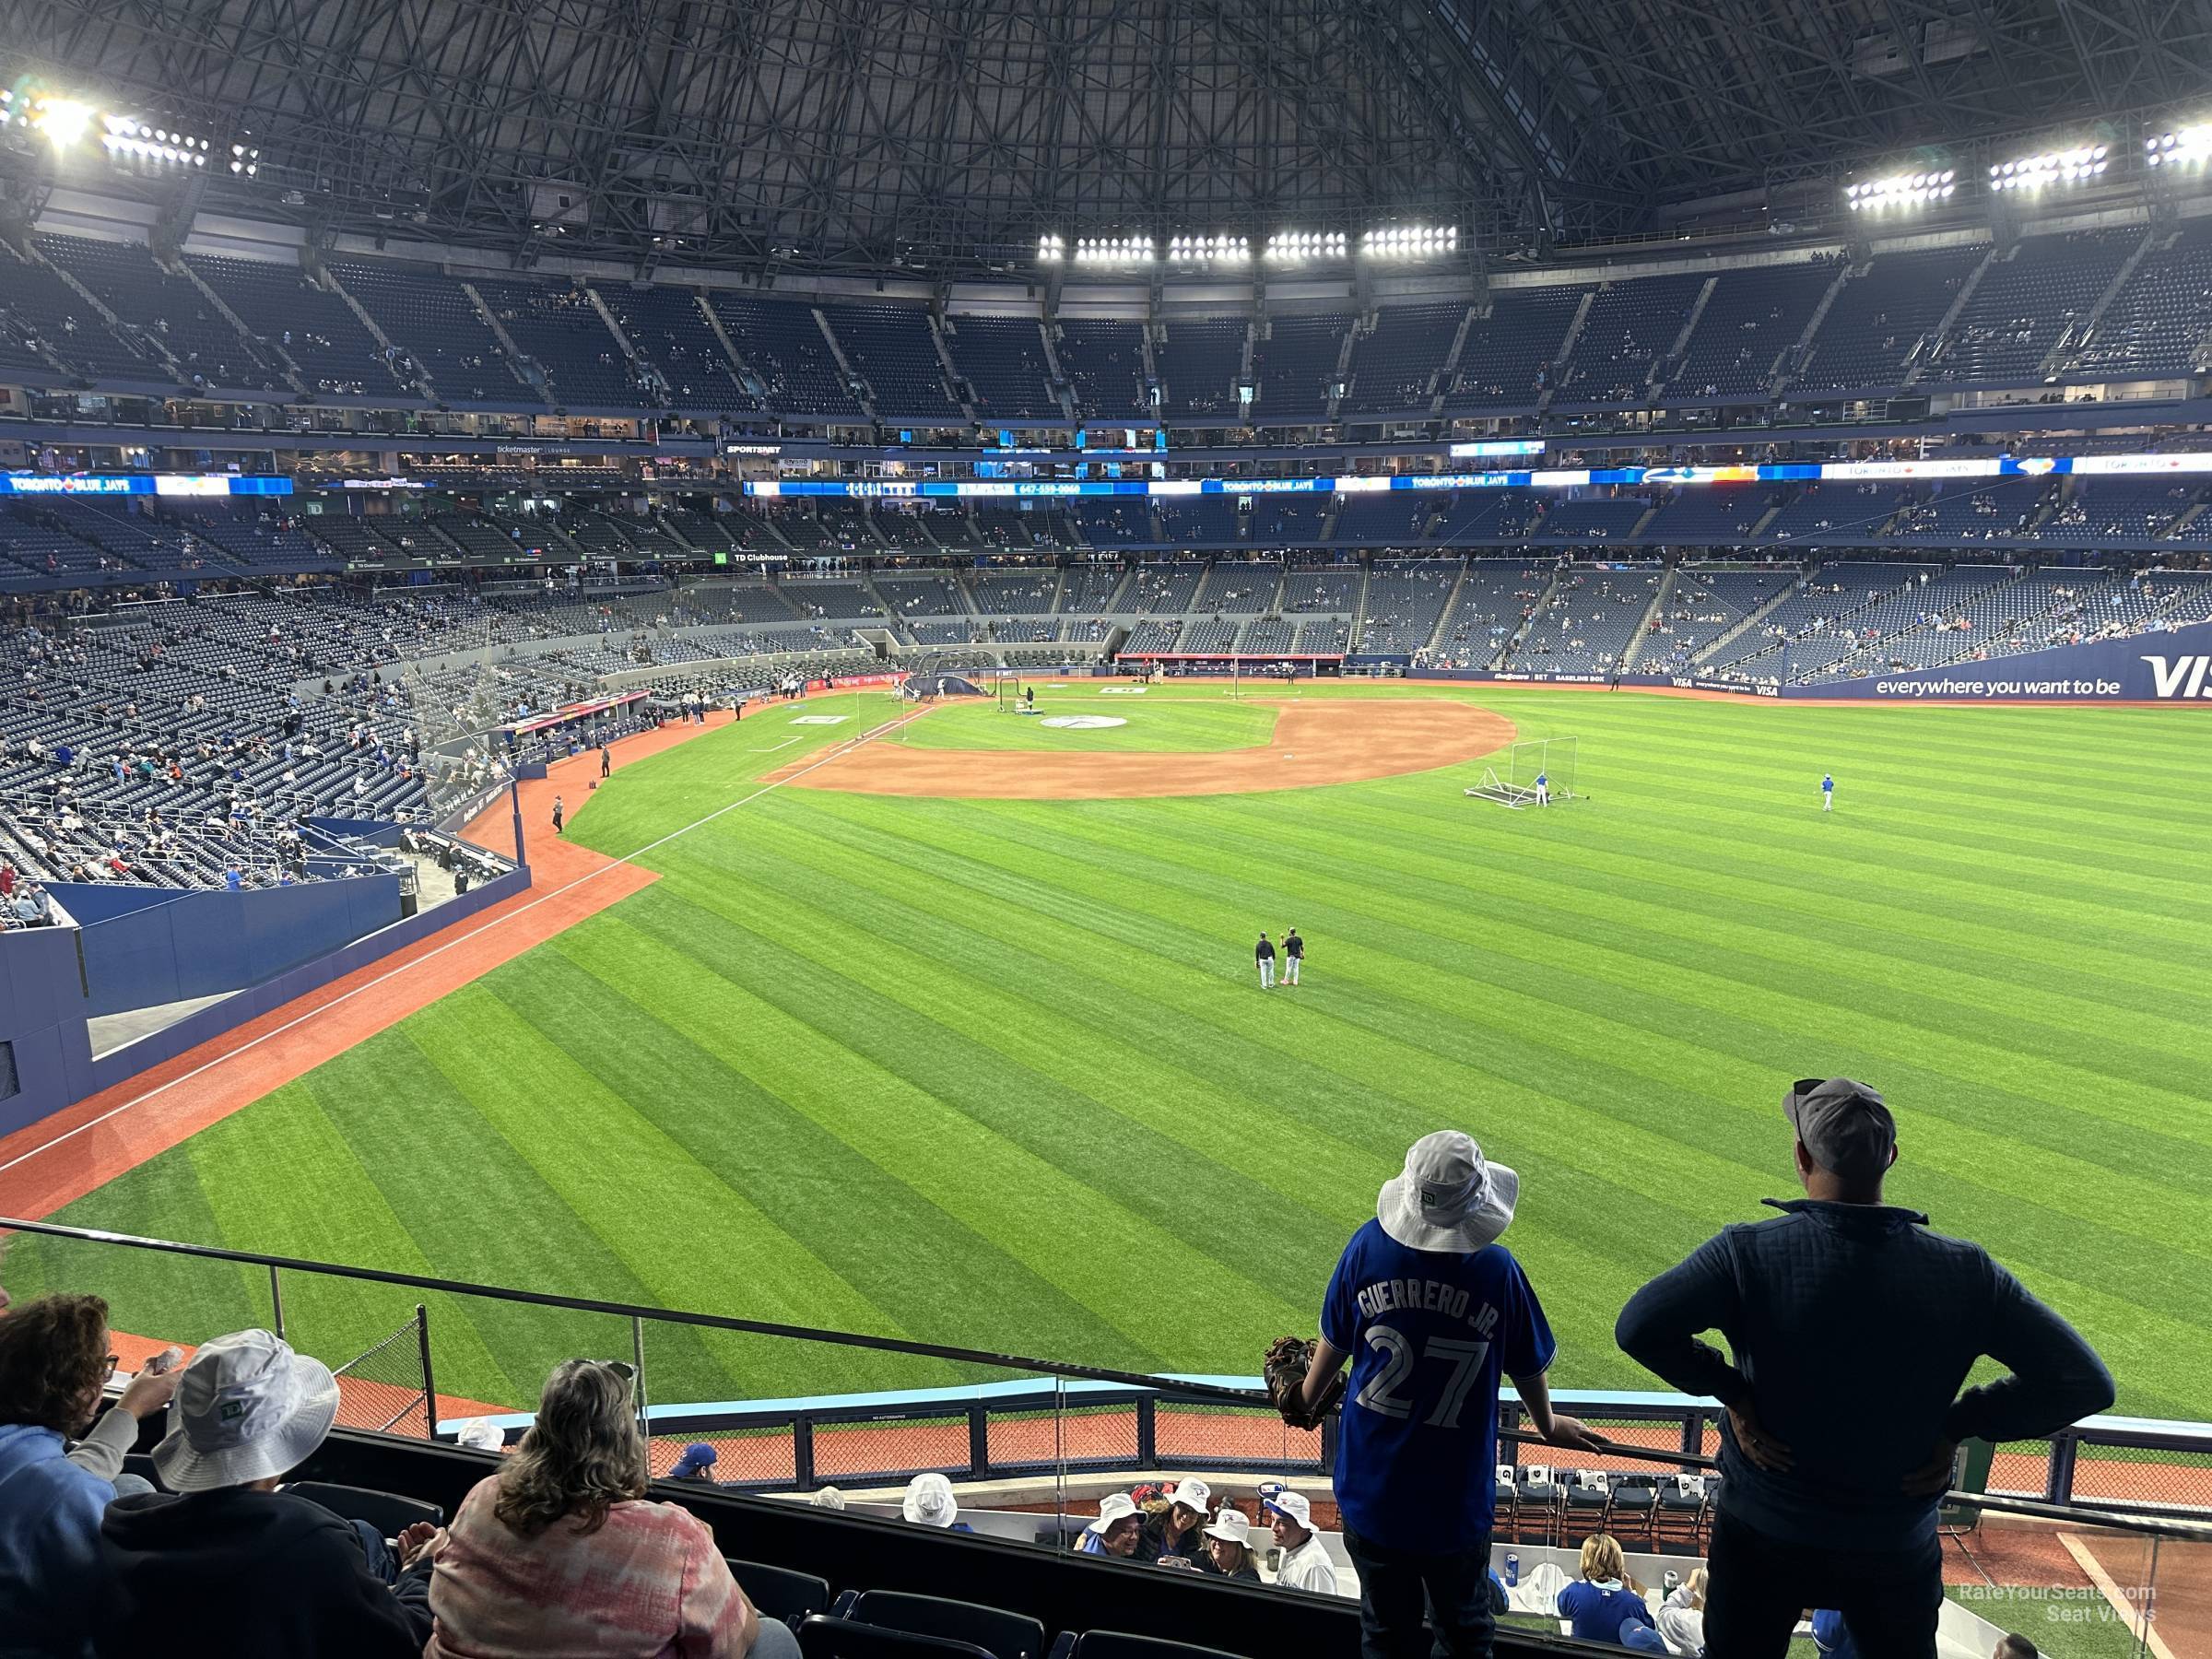 section 206, row 5 seat view  for baseball - rogers centre